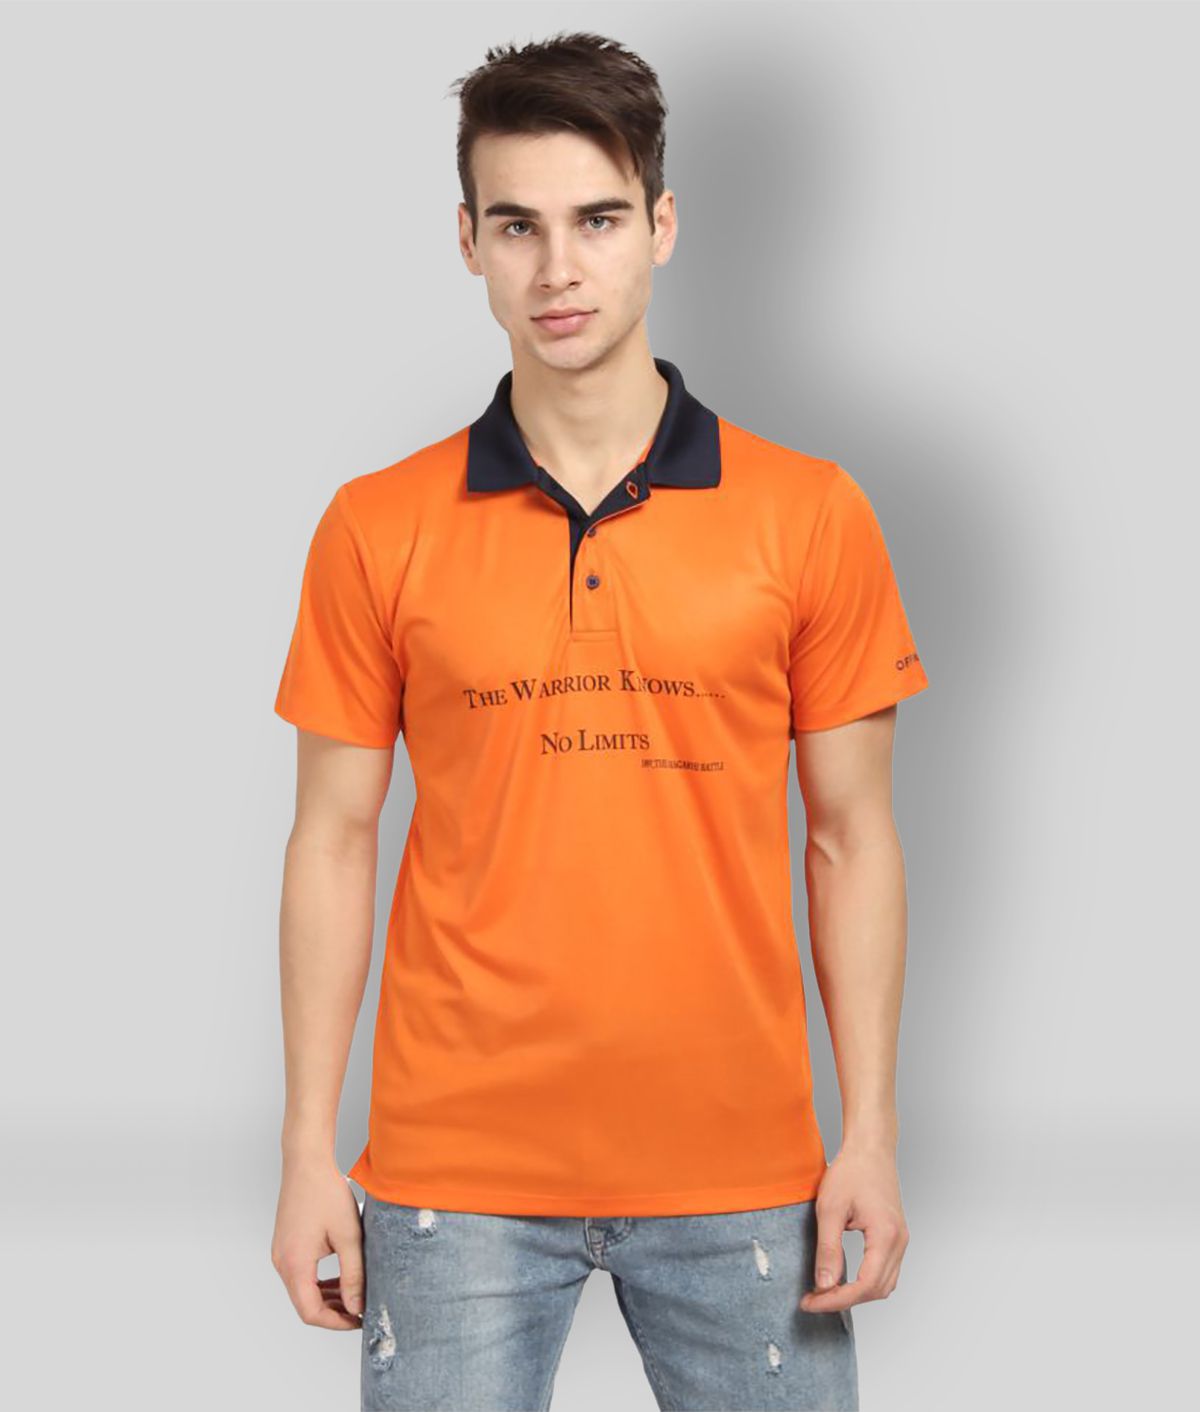     			OFF LIMITS - Orange Polyester Regular Fit Men's Polo T Shirt ( Pack of 1 )